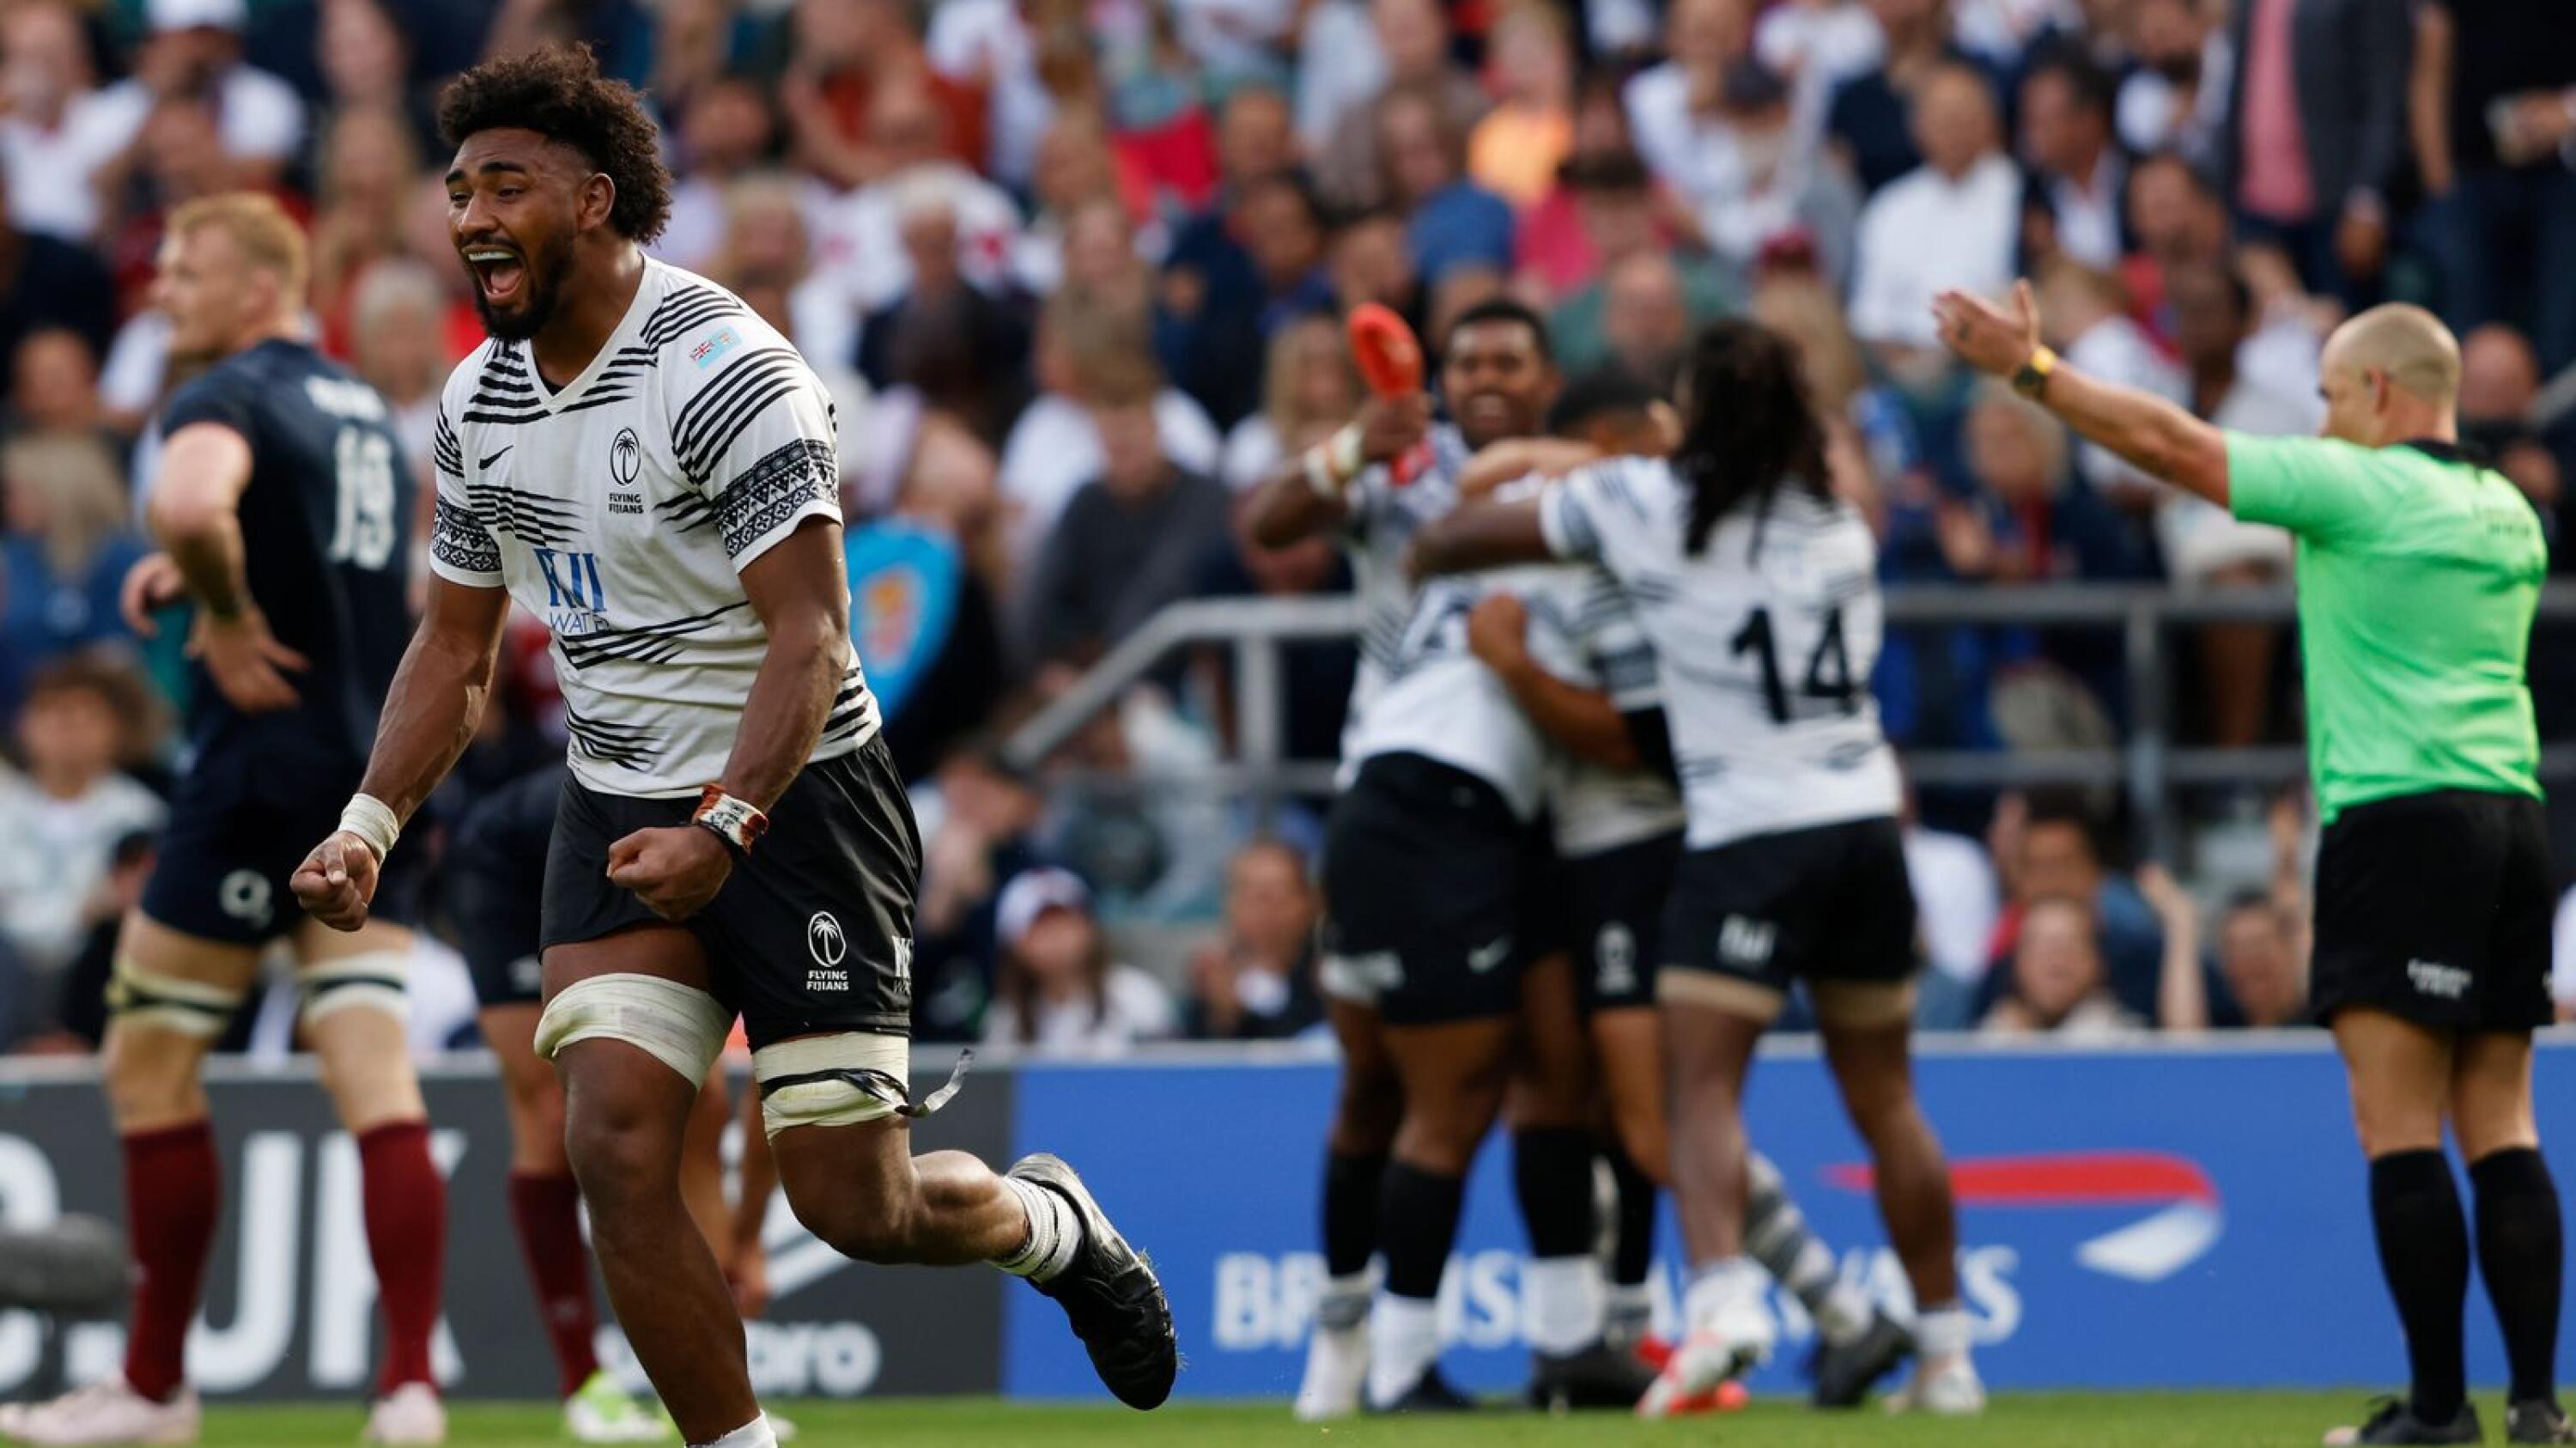 Fiji players celebrate on the final whistle during the pre-2023 World Cup warm-up rugby union match between England and Fiji at Twickenham Stadium in southwest London